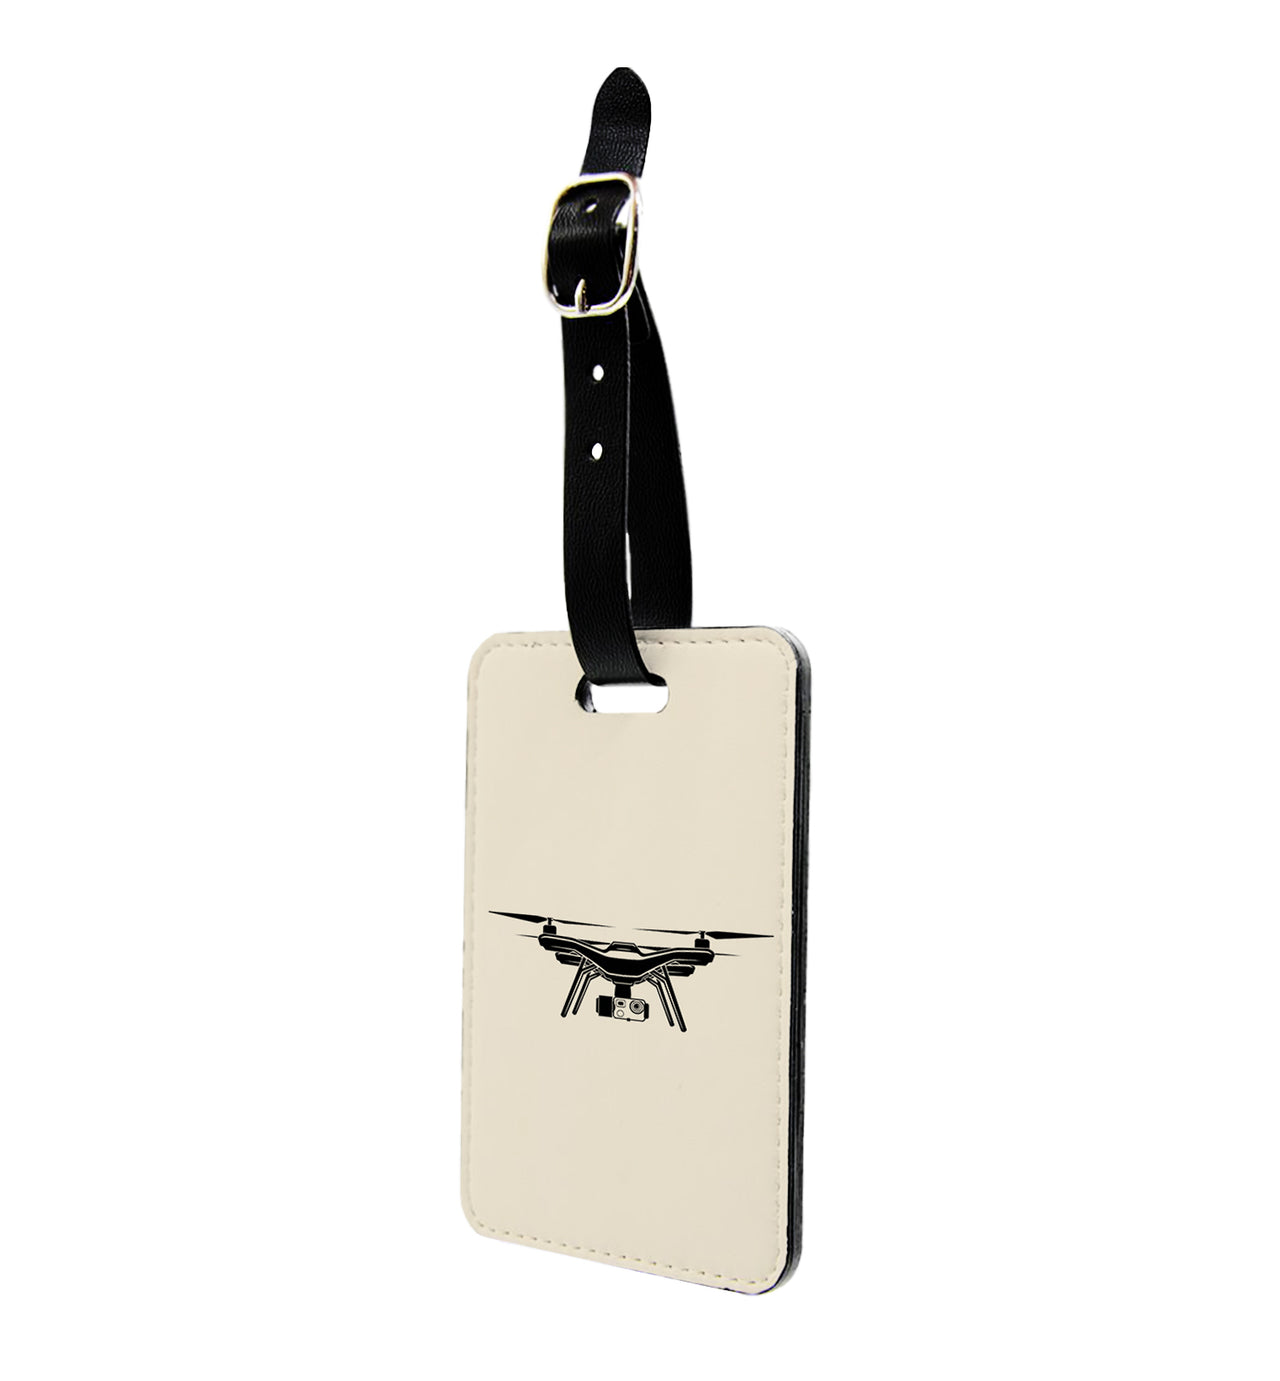 Drone Silhouette Designed Luggage Tag